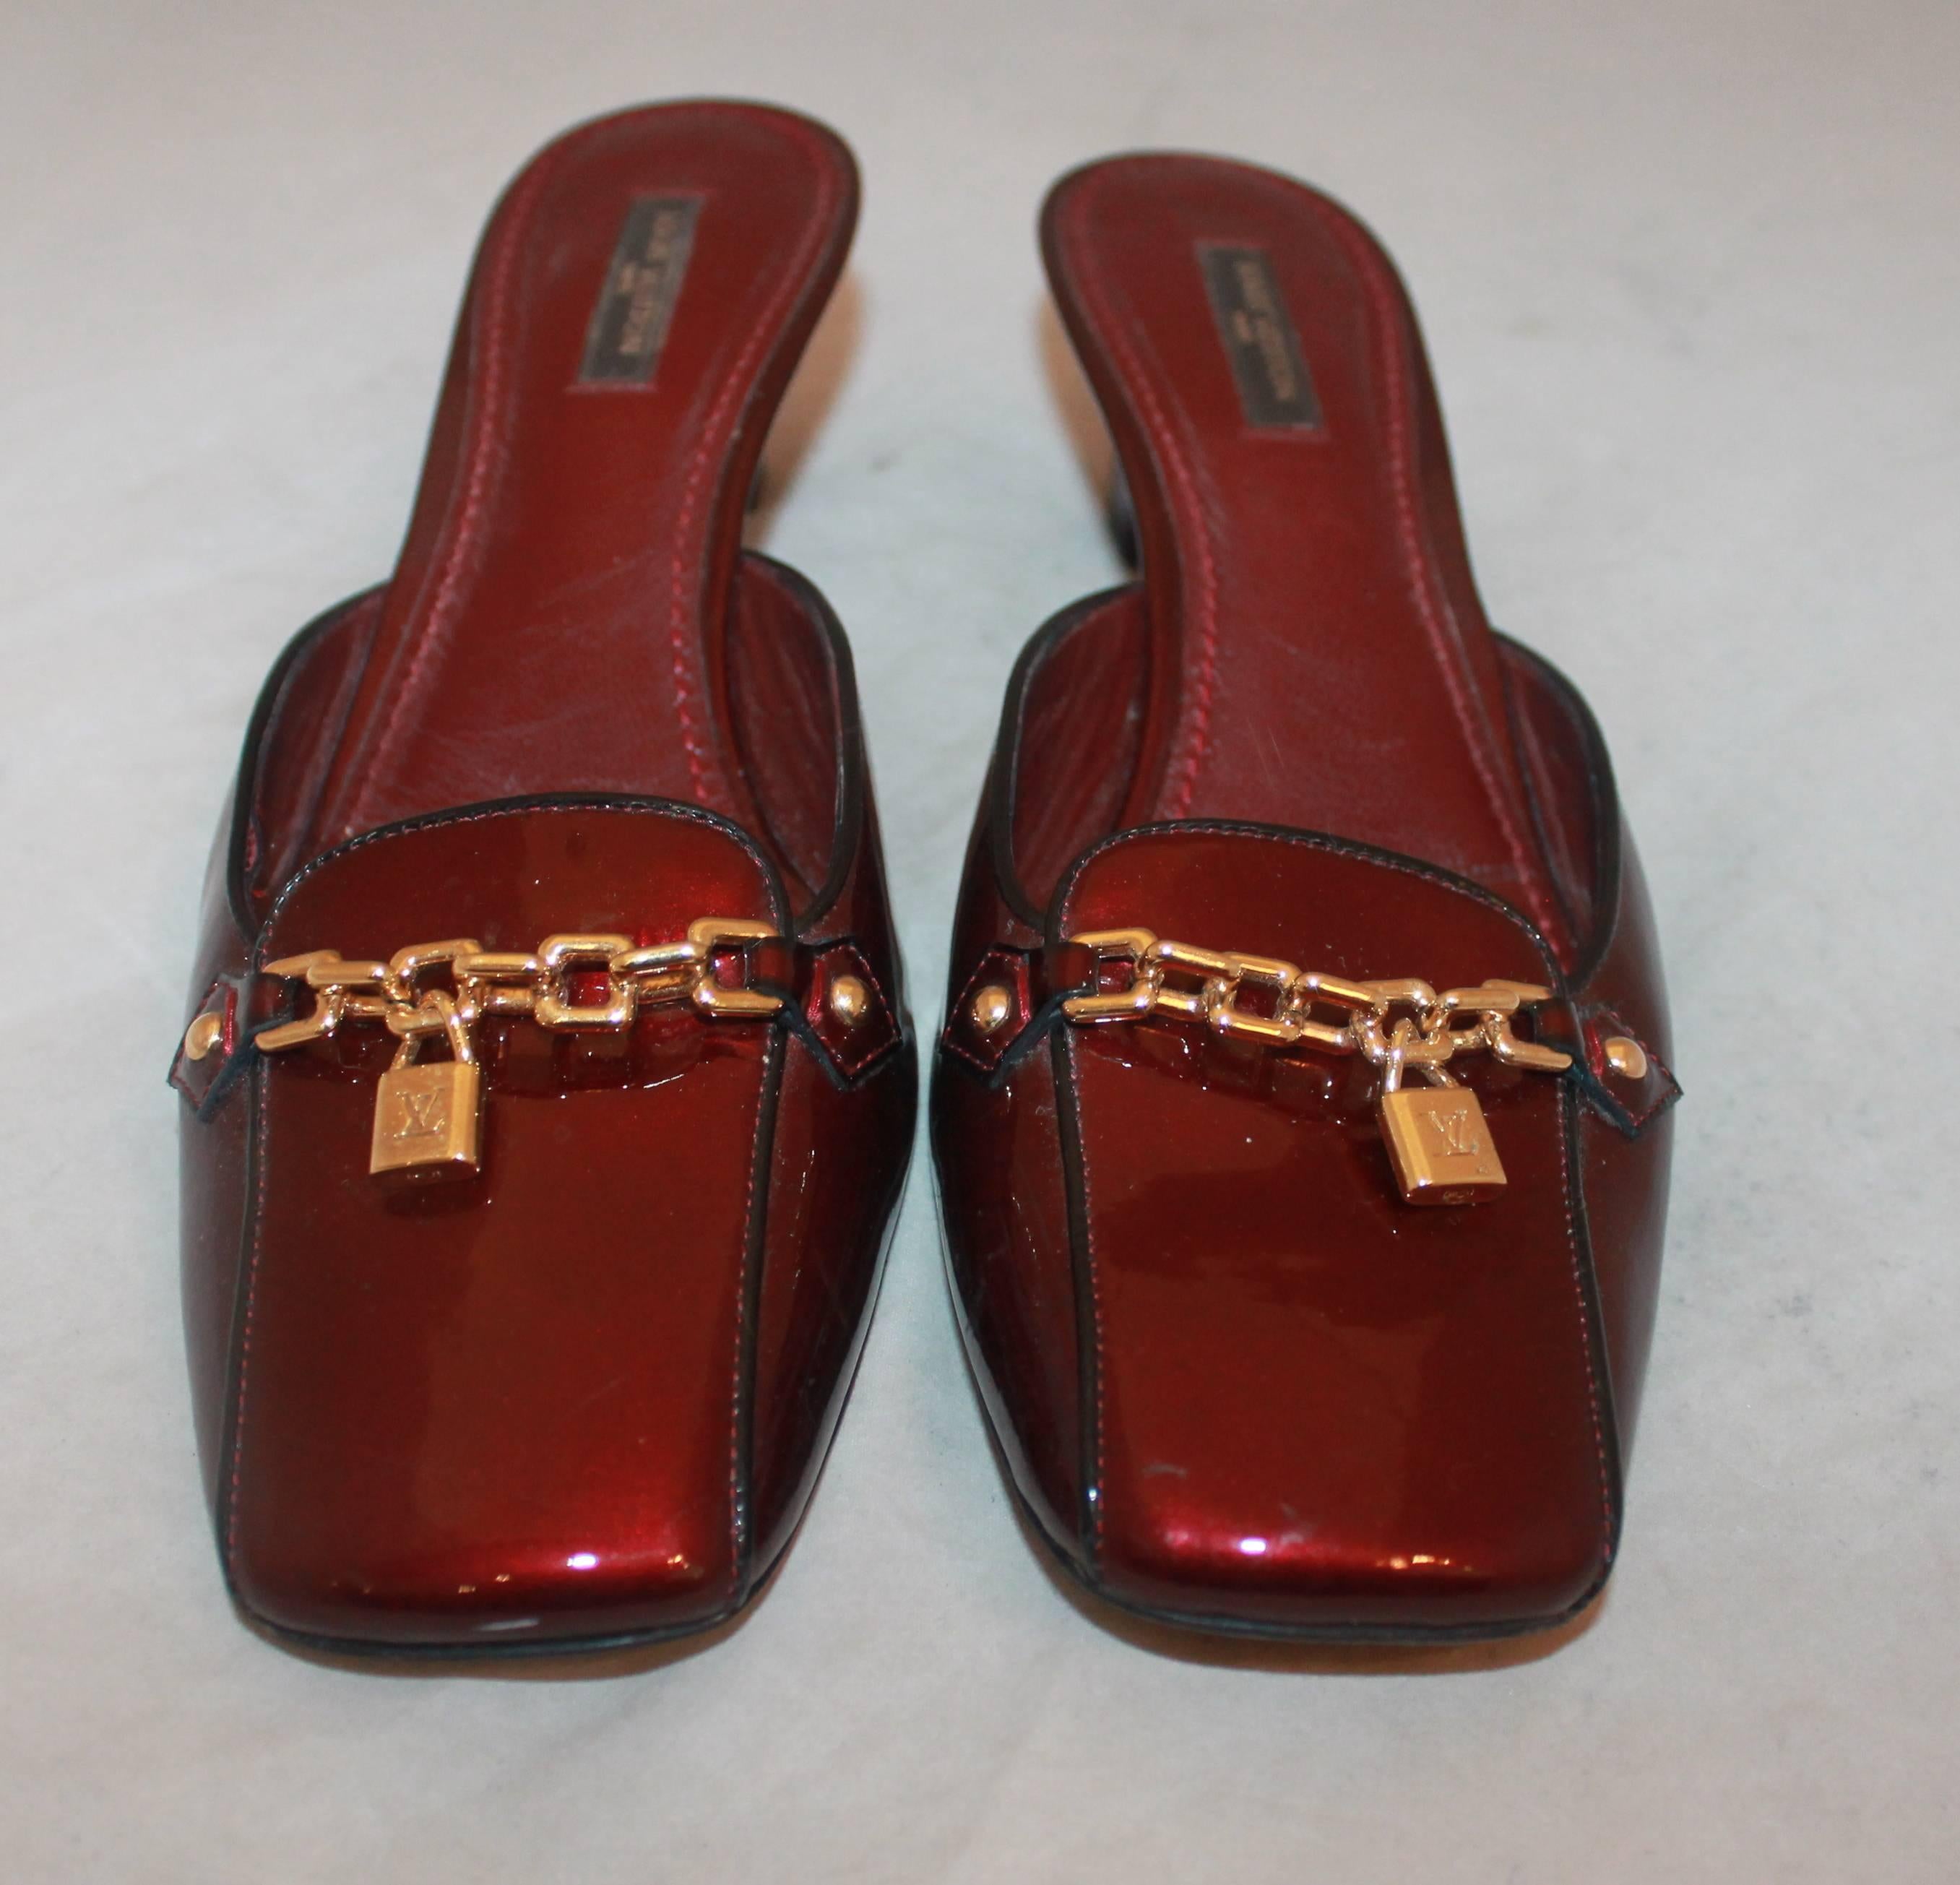 Black Louis Vuitton Deep Red Shimmer Patent Loafer-Style Slides - 38.5